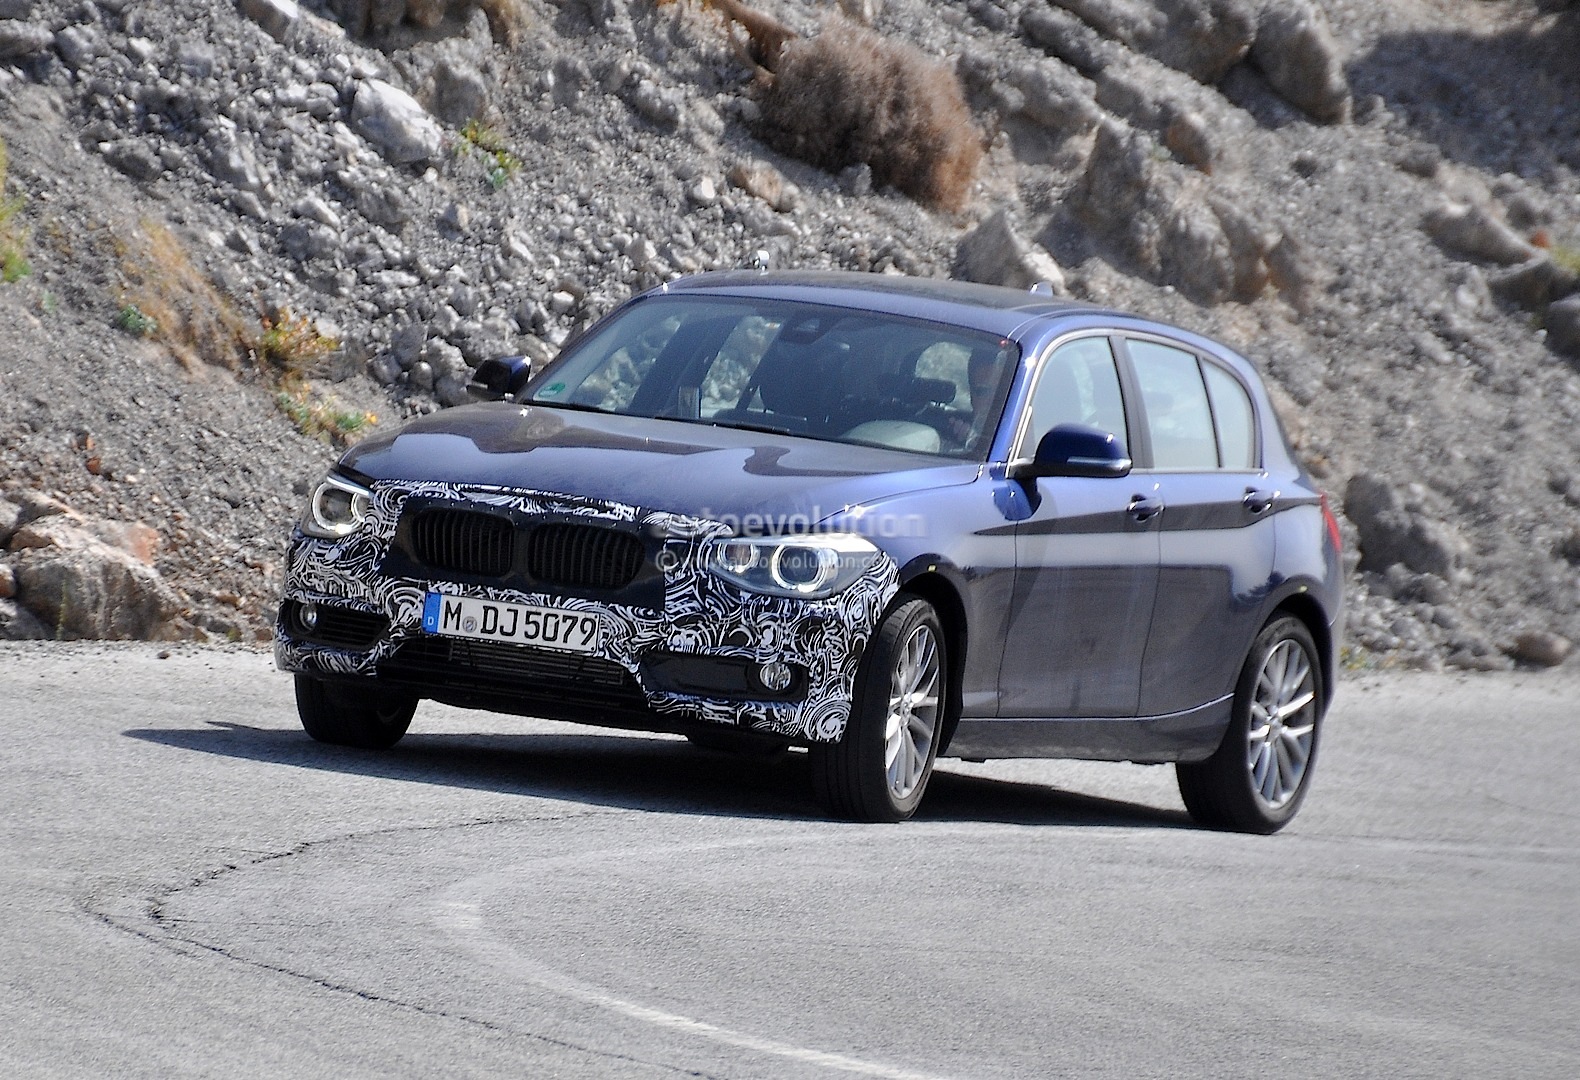 2014 BMW F10 5 Series Facelift - Caught Undisguised in China